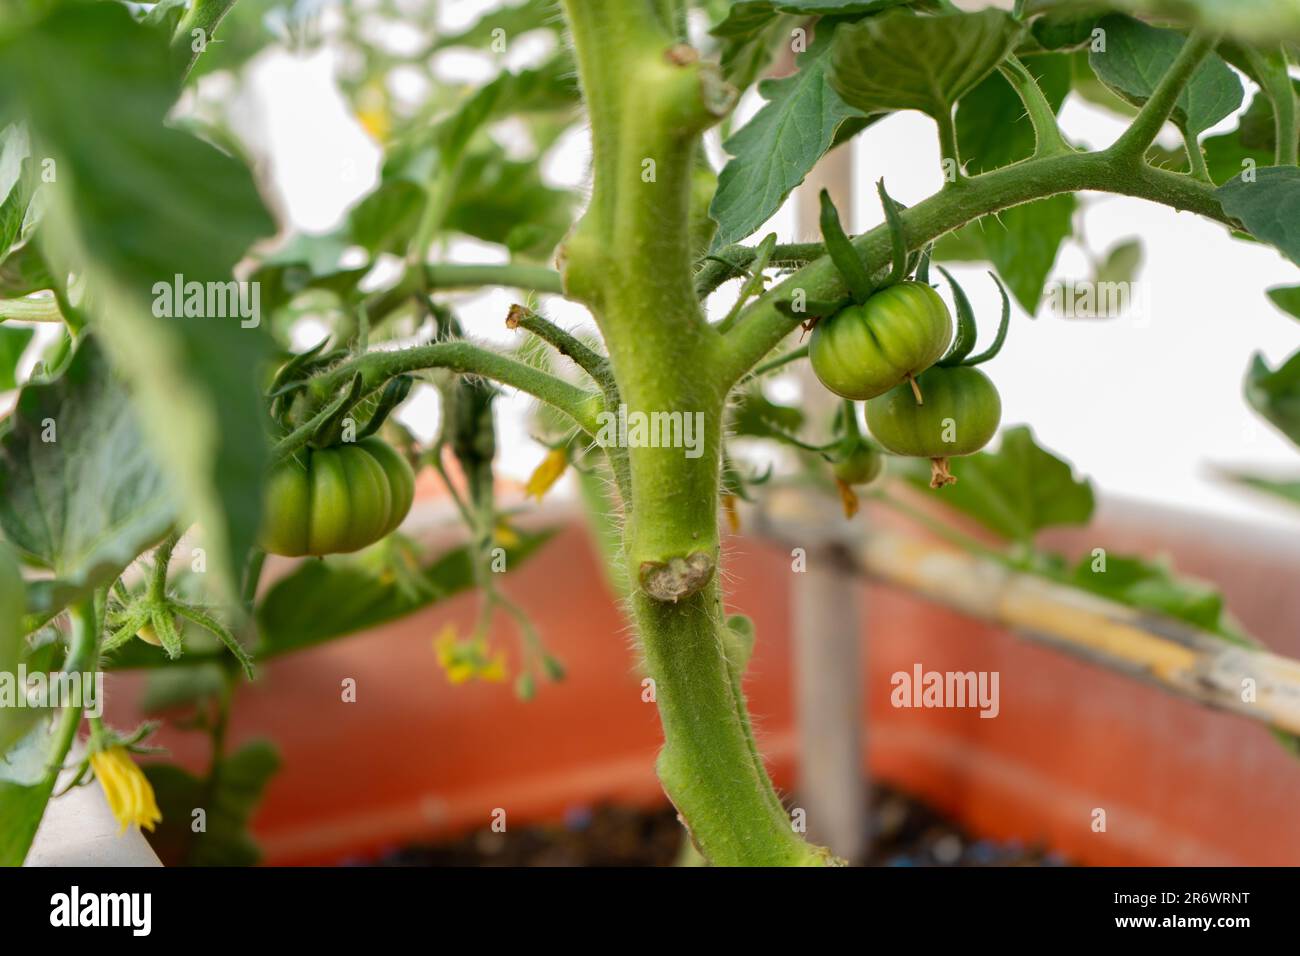 Tomato plant with green tomatoes in full growth, urban gardening concept Stock Photo